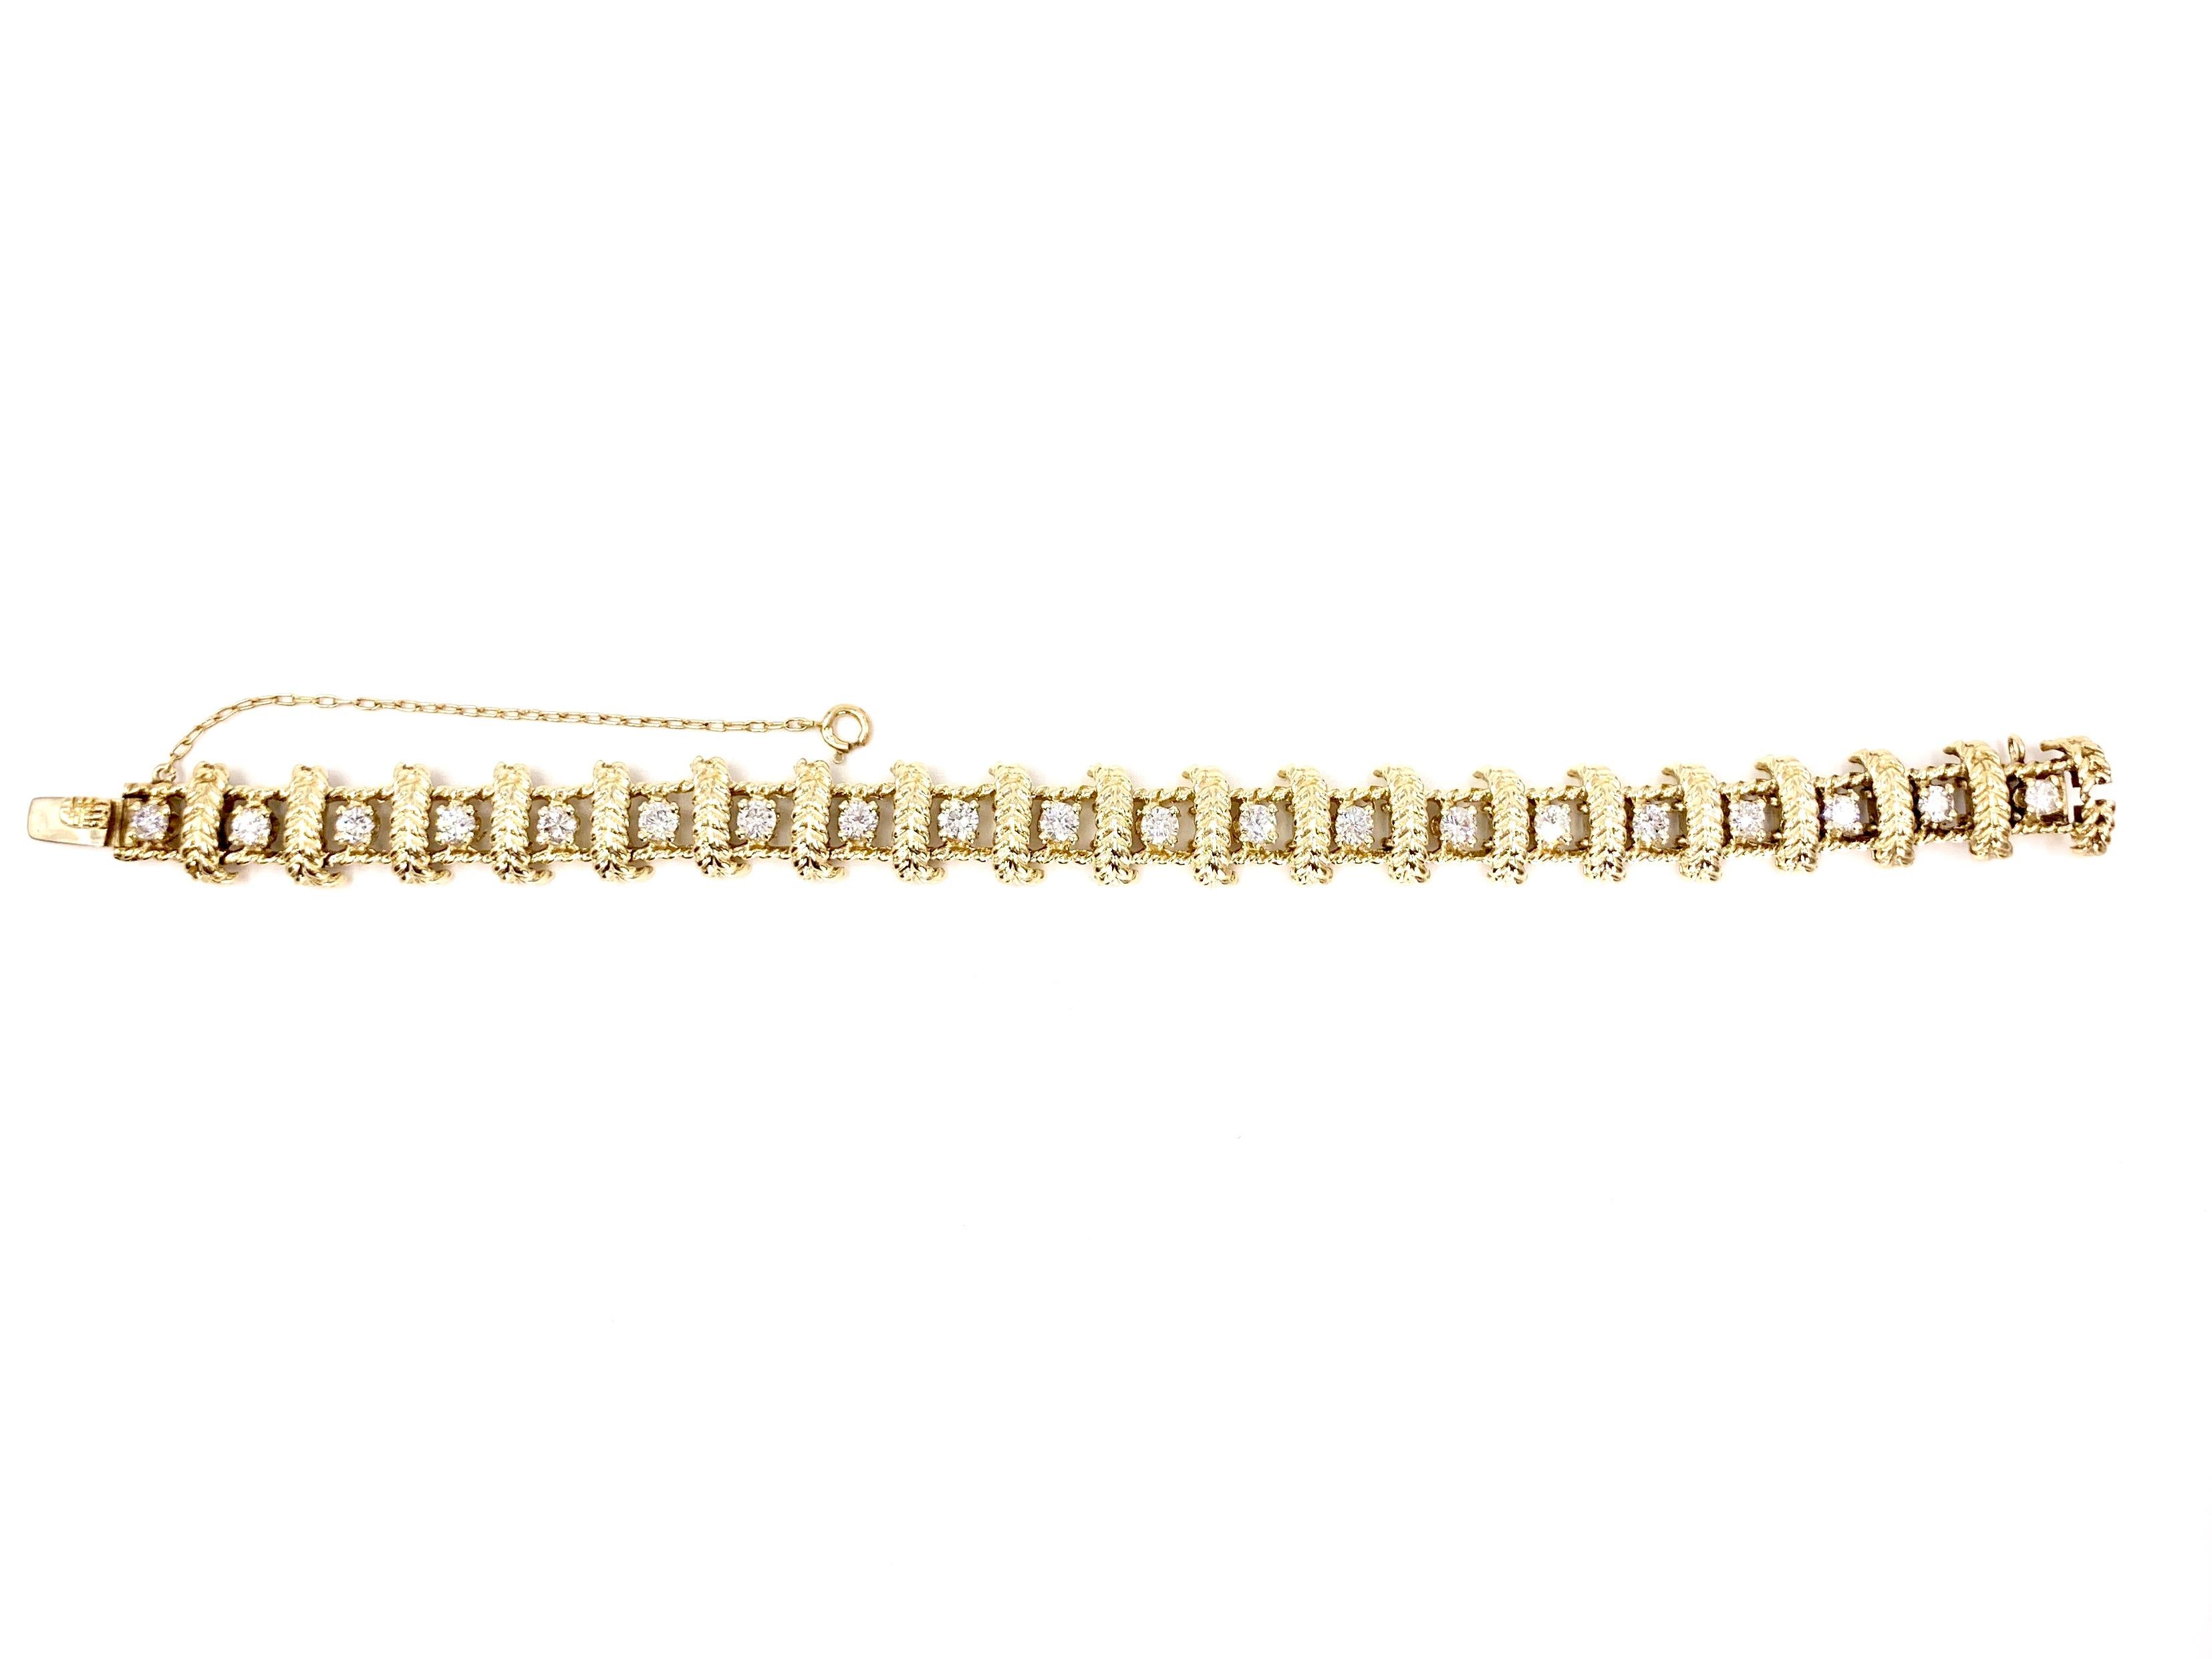 Circa 1960's, this unique textured 14 karat yellow gold and diamond bracelet features 20 round brilliant diamonds at approximately 2.40 carats total weight. Each link features a vertical gold leaf design between each diamond. Bracelet closes